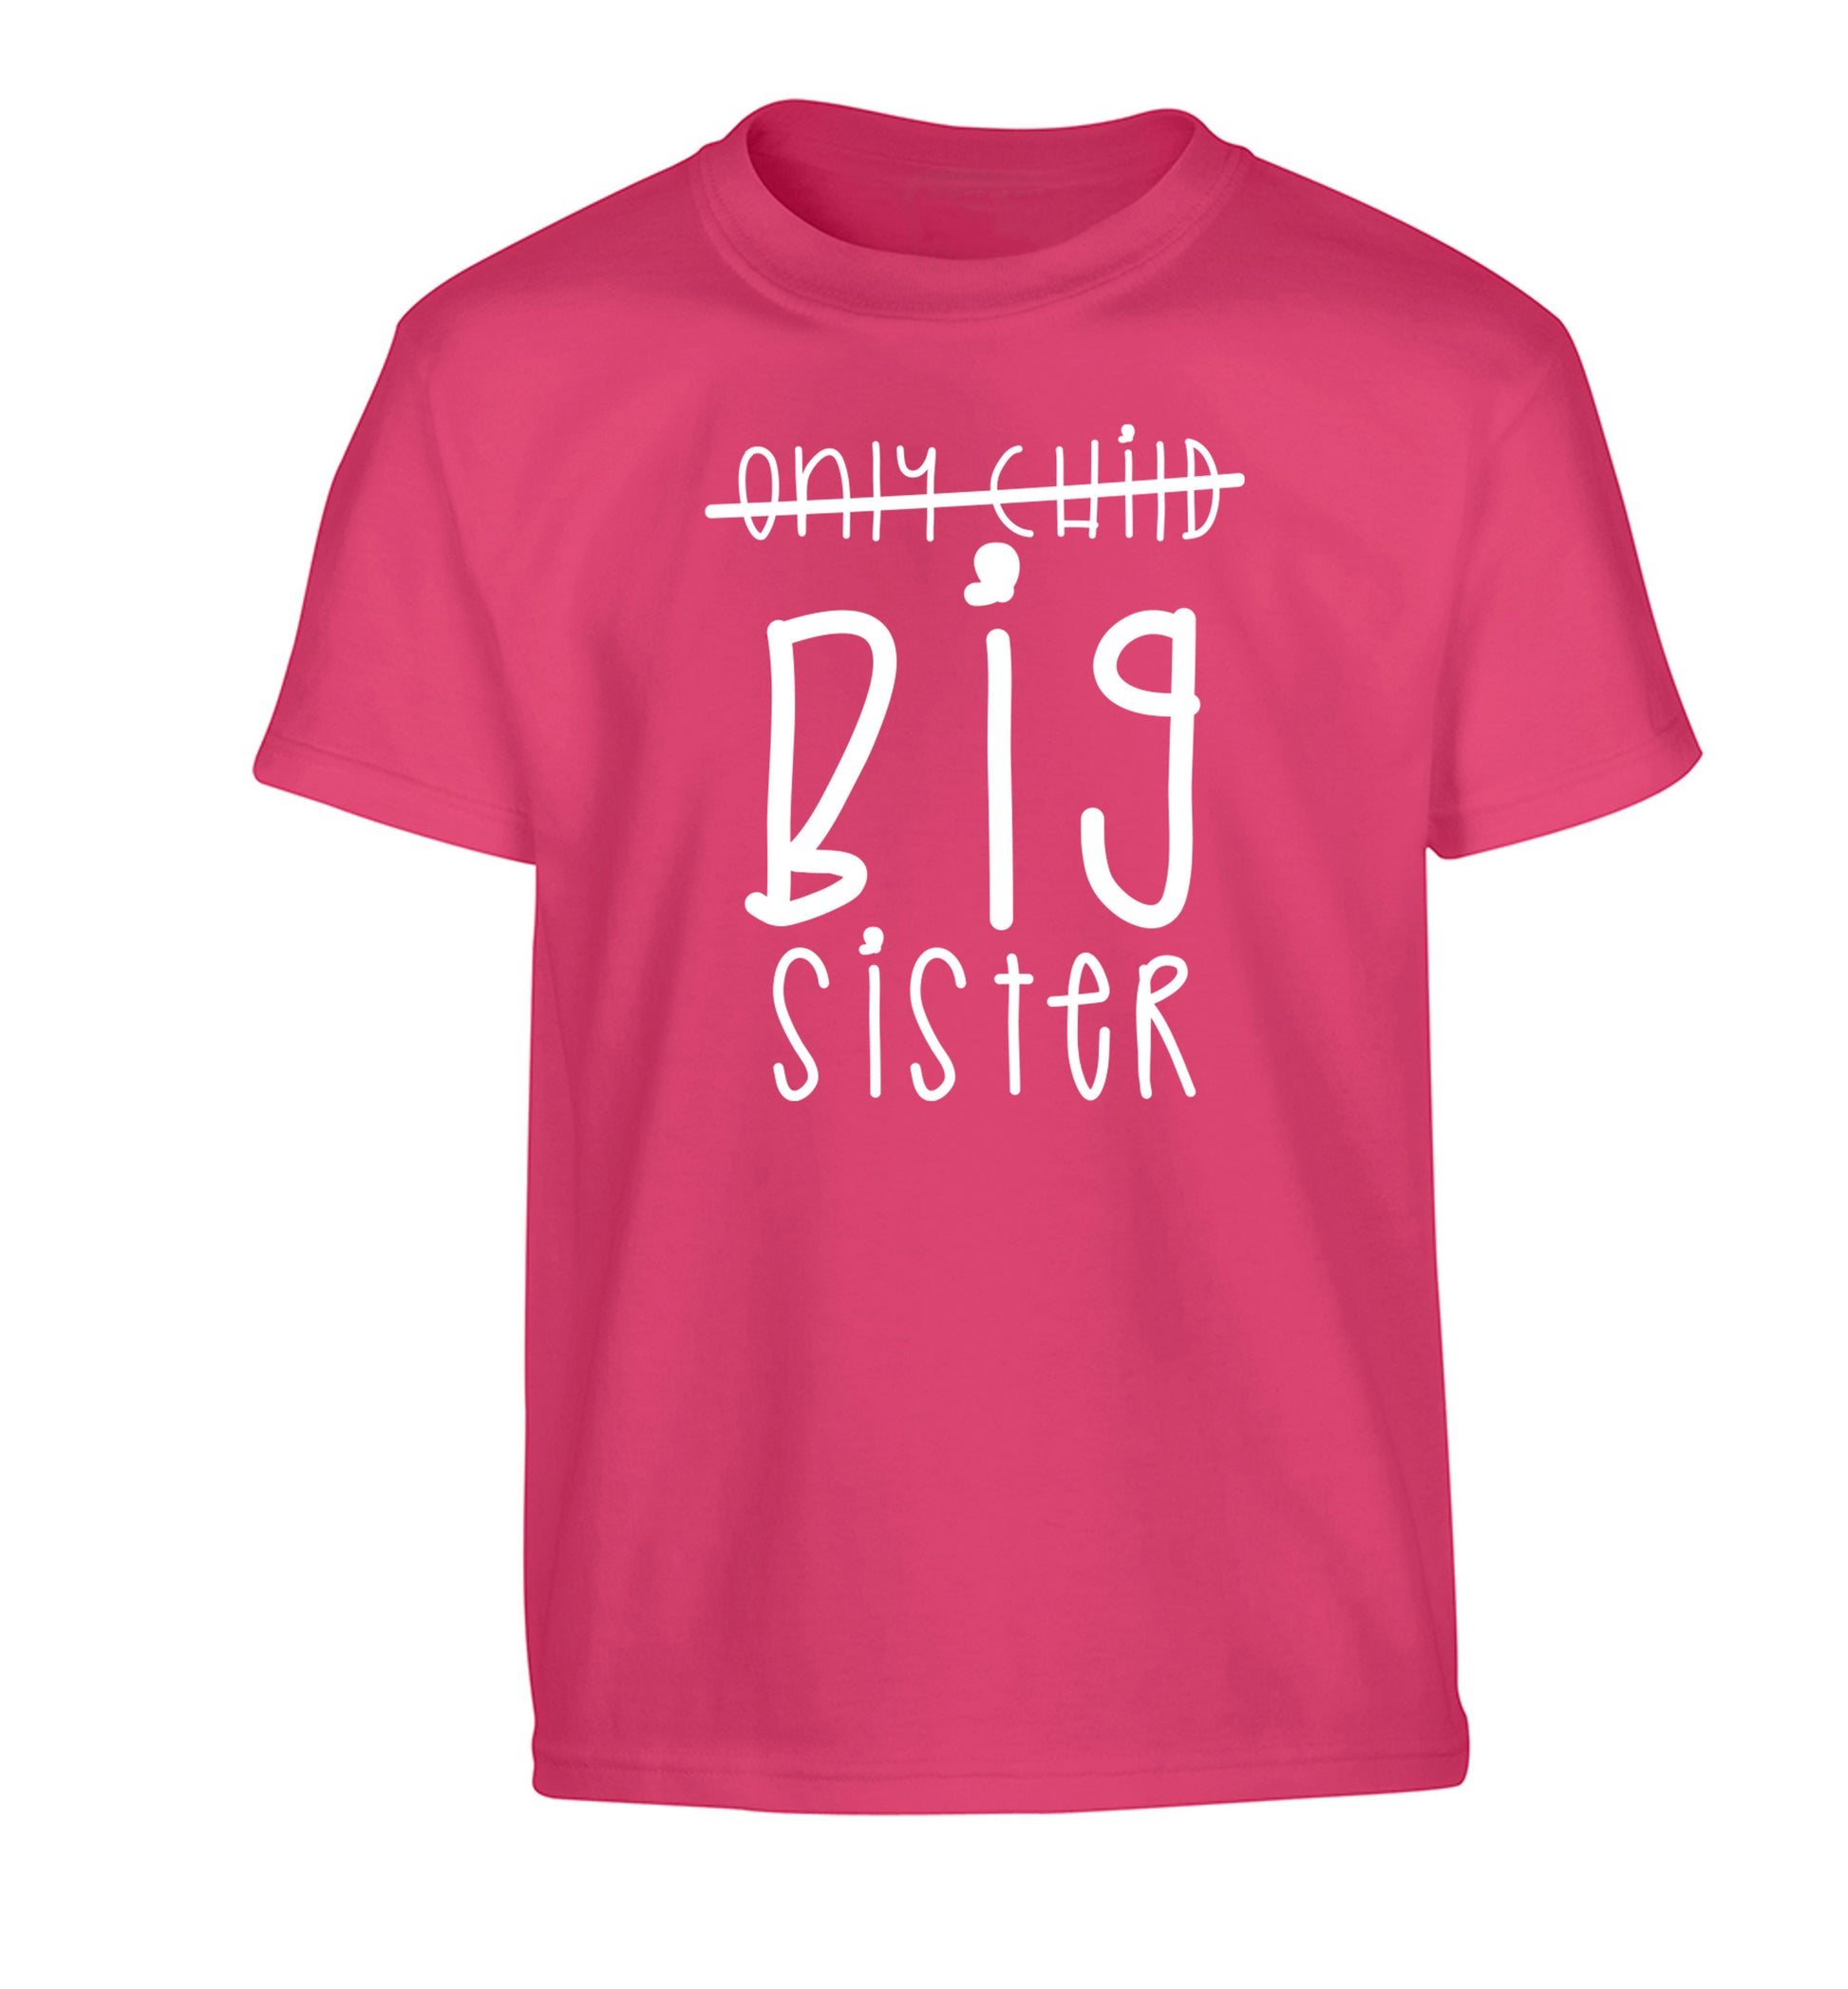 Only child big sister Children's pink Tshirt 12-14 Years